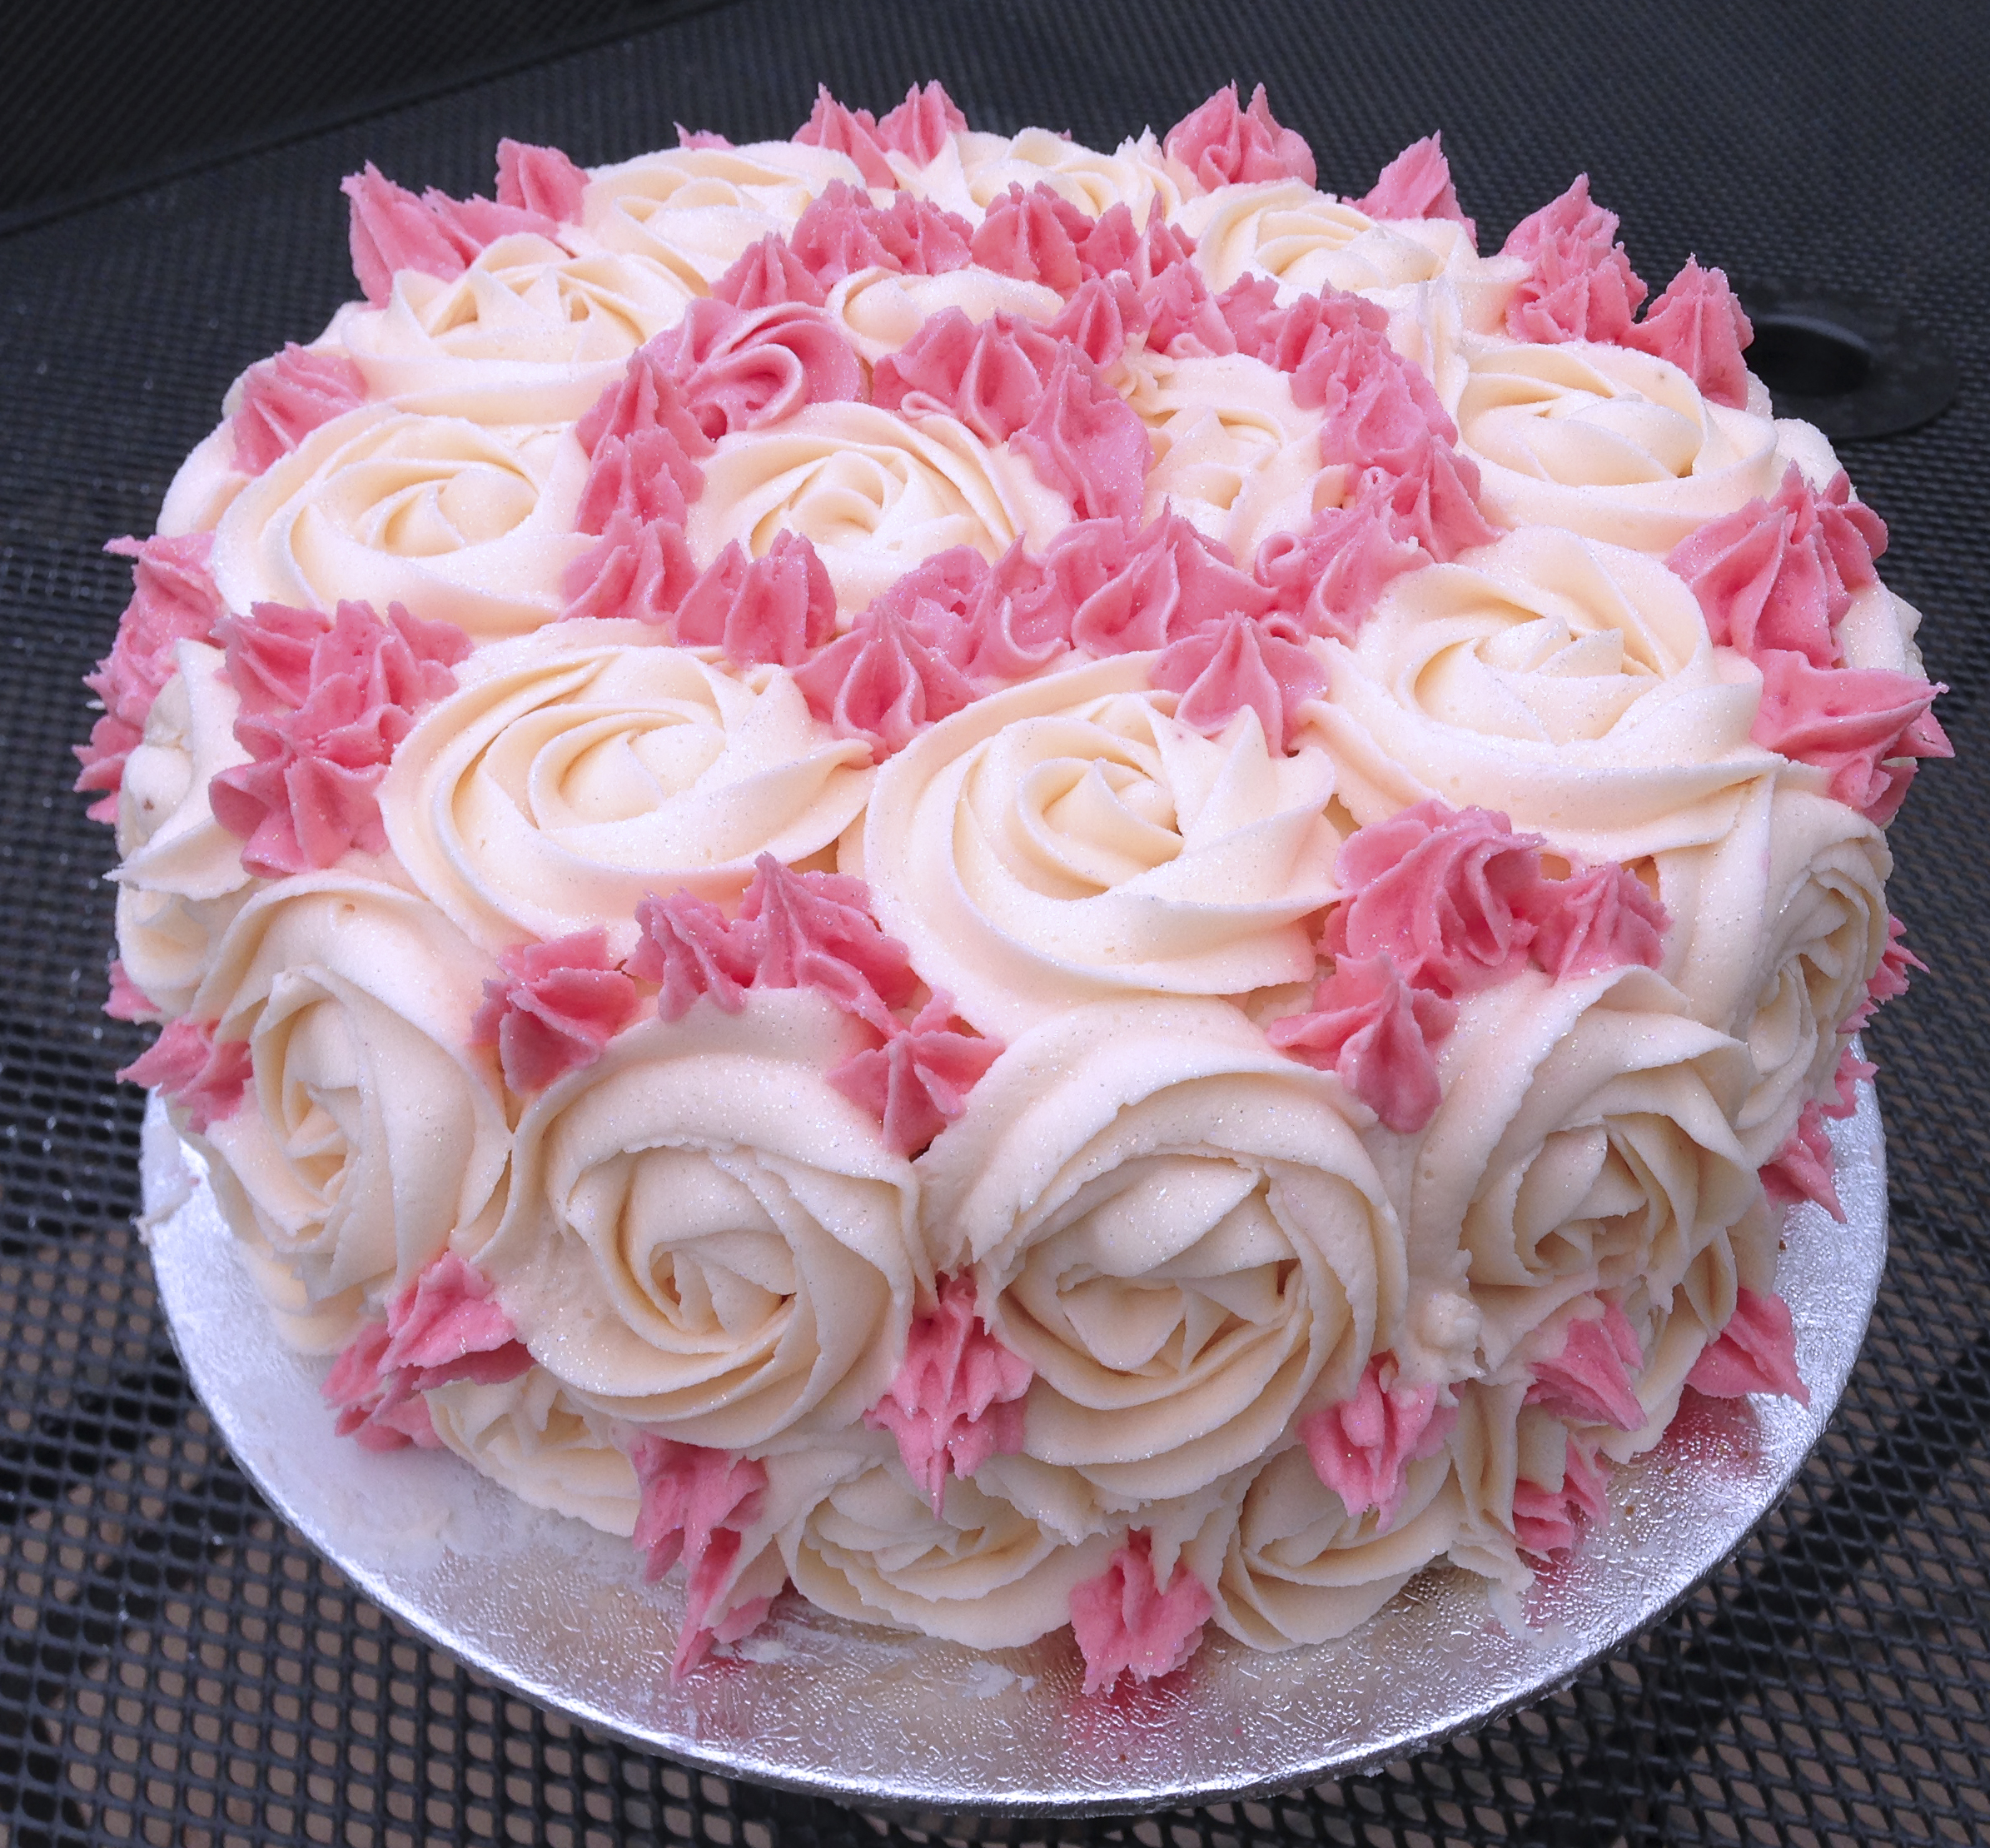 How To Decorate A Rose Cake